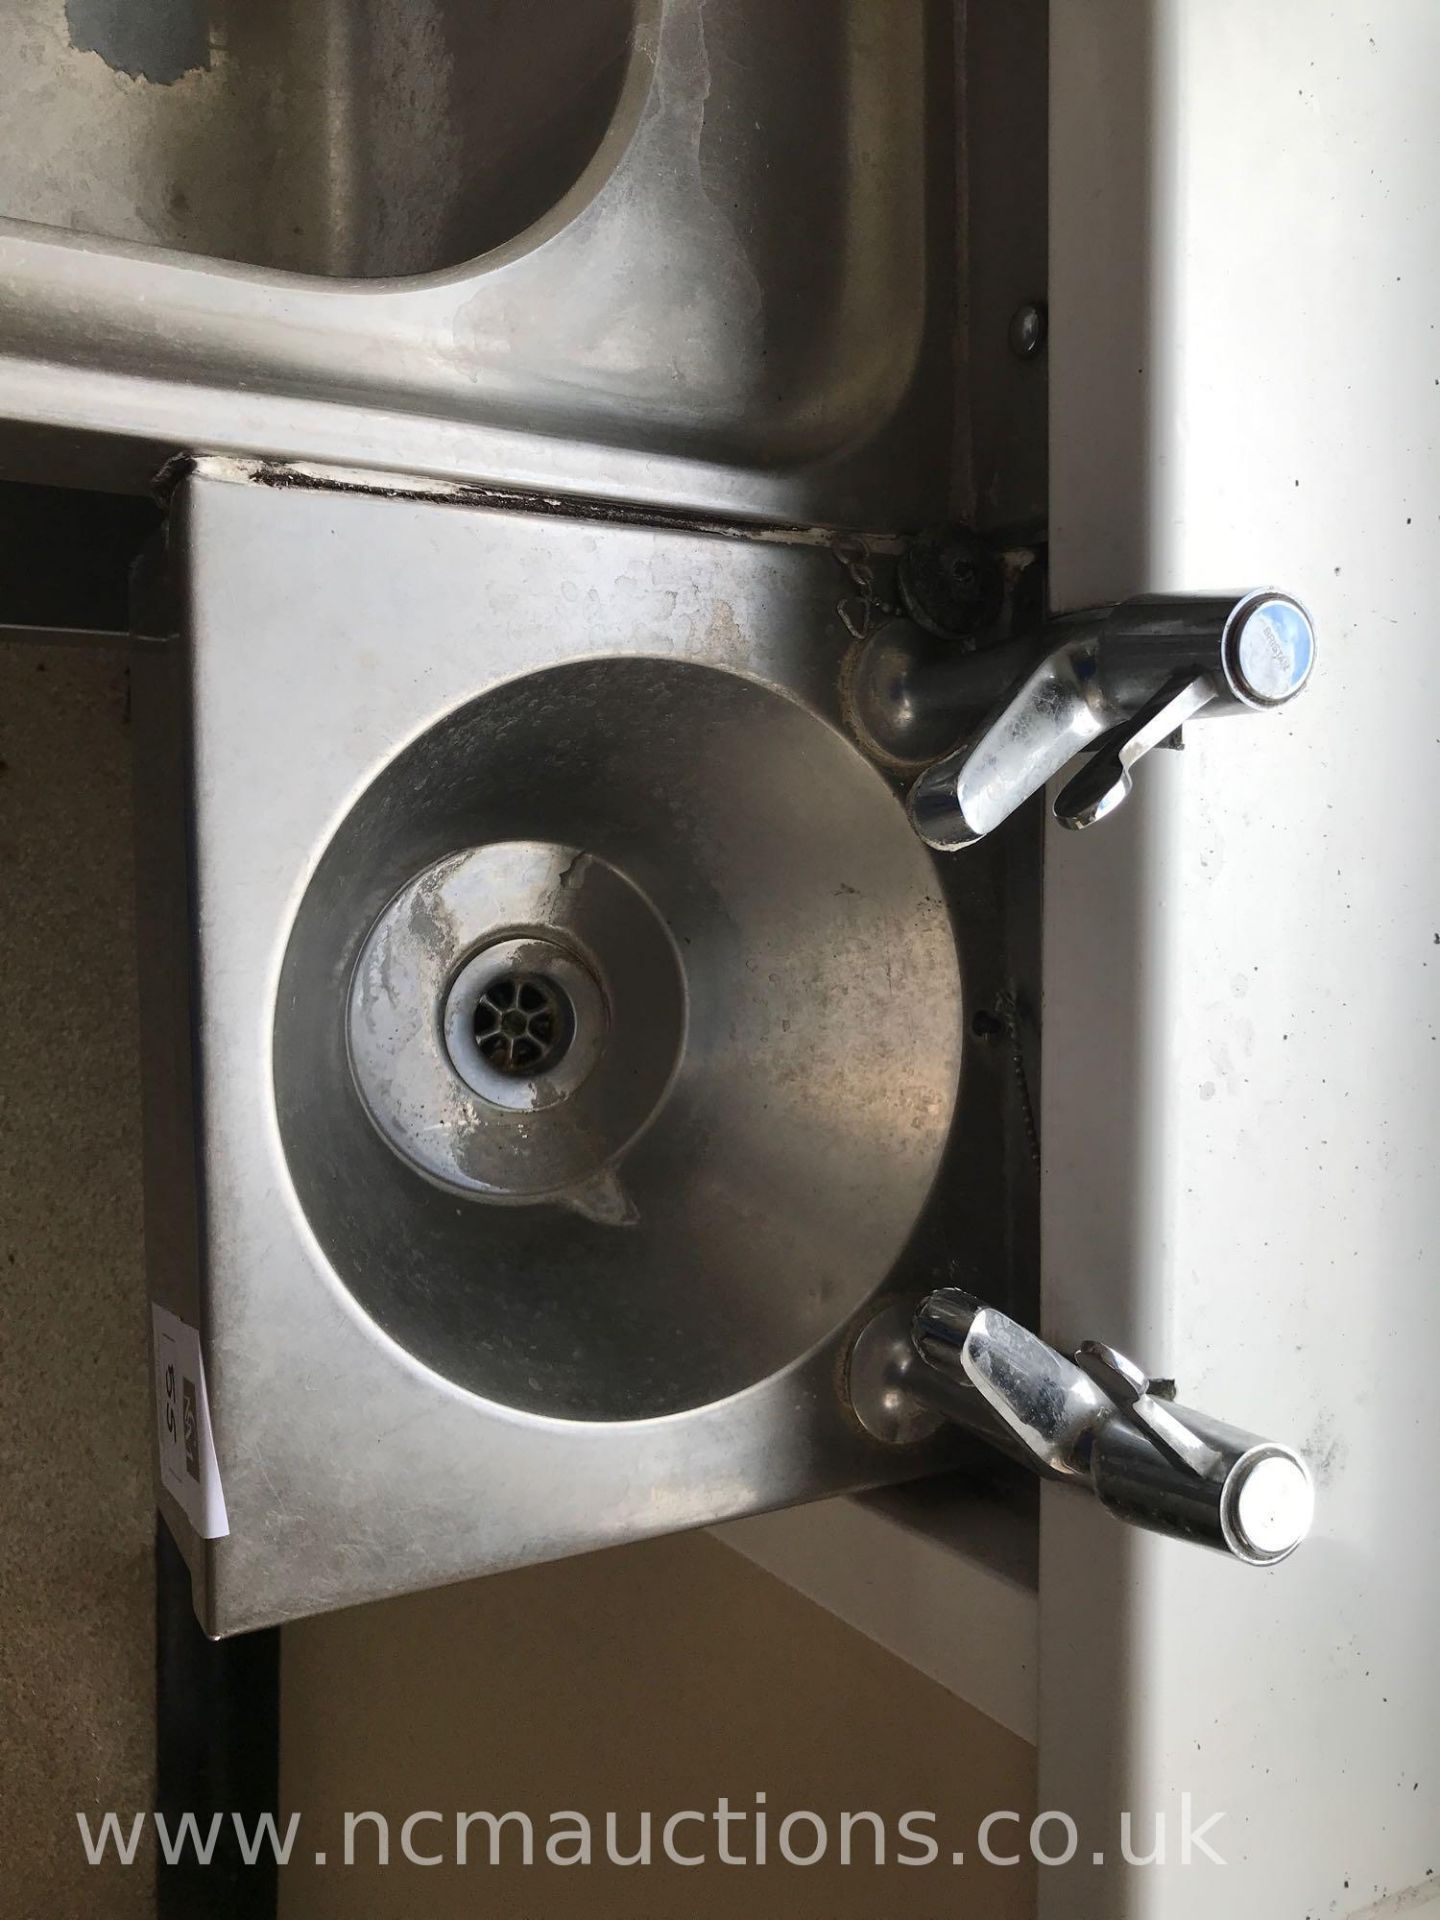 Stainless Steel Hand Washing Basin - Image 2 of 2